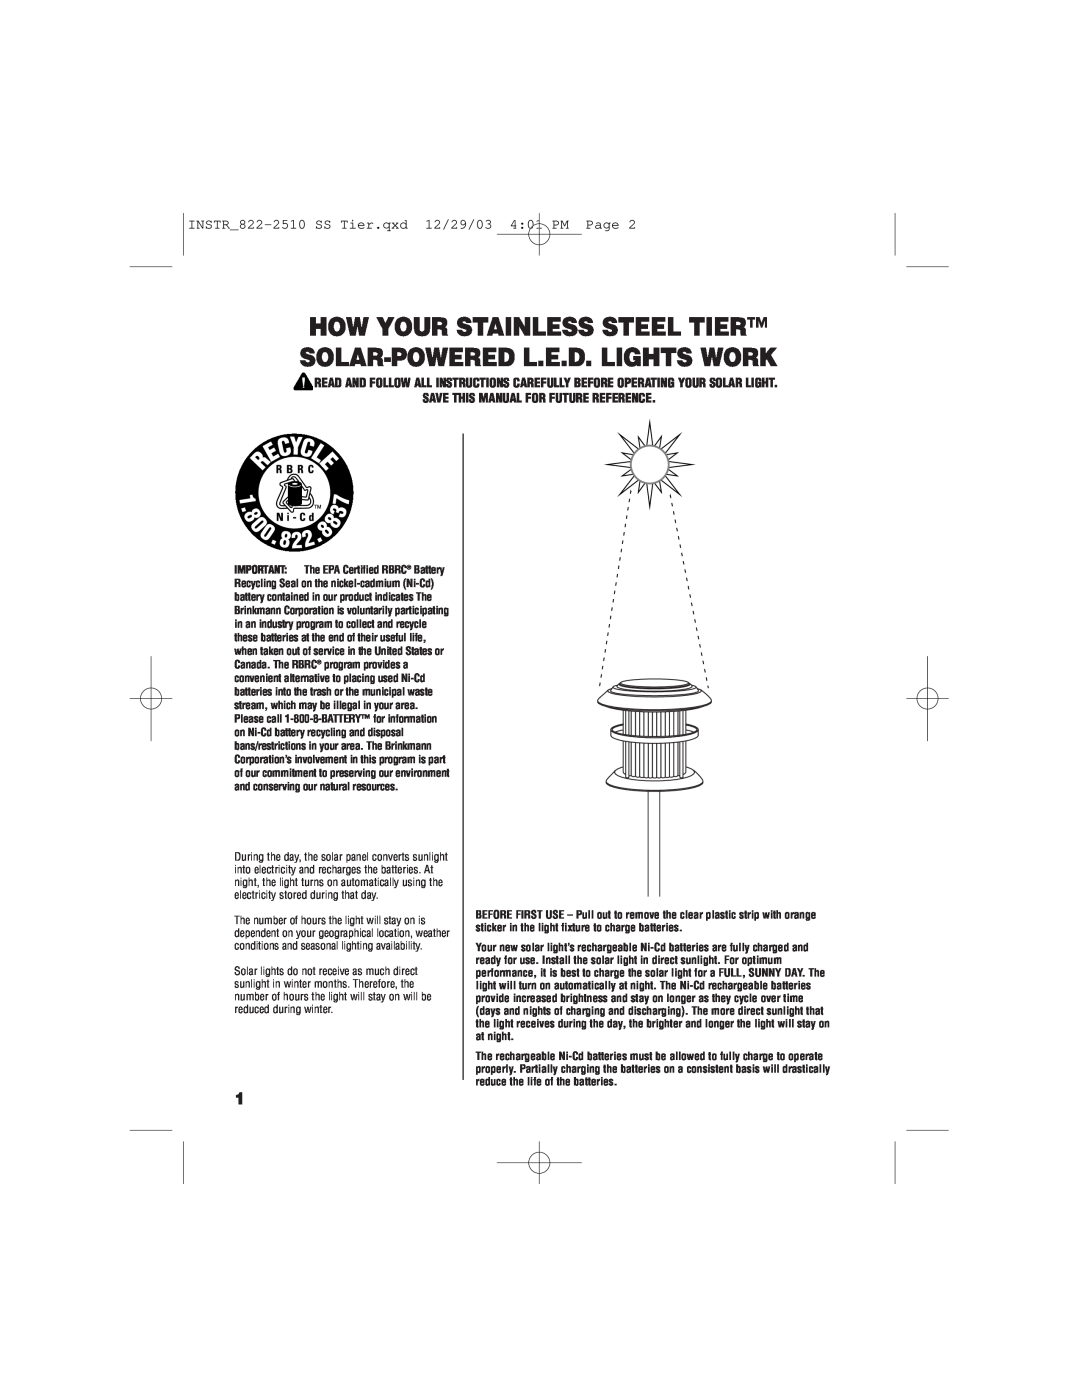 Brinkmann How Your Stainless Steel Tier Solar-Powered L.E.D. Lights Work, Save This Manual For Future Reference 